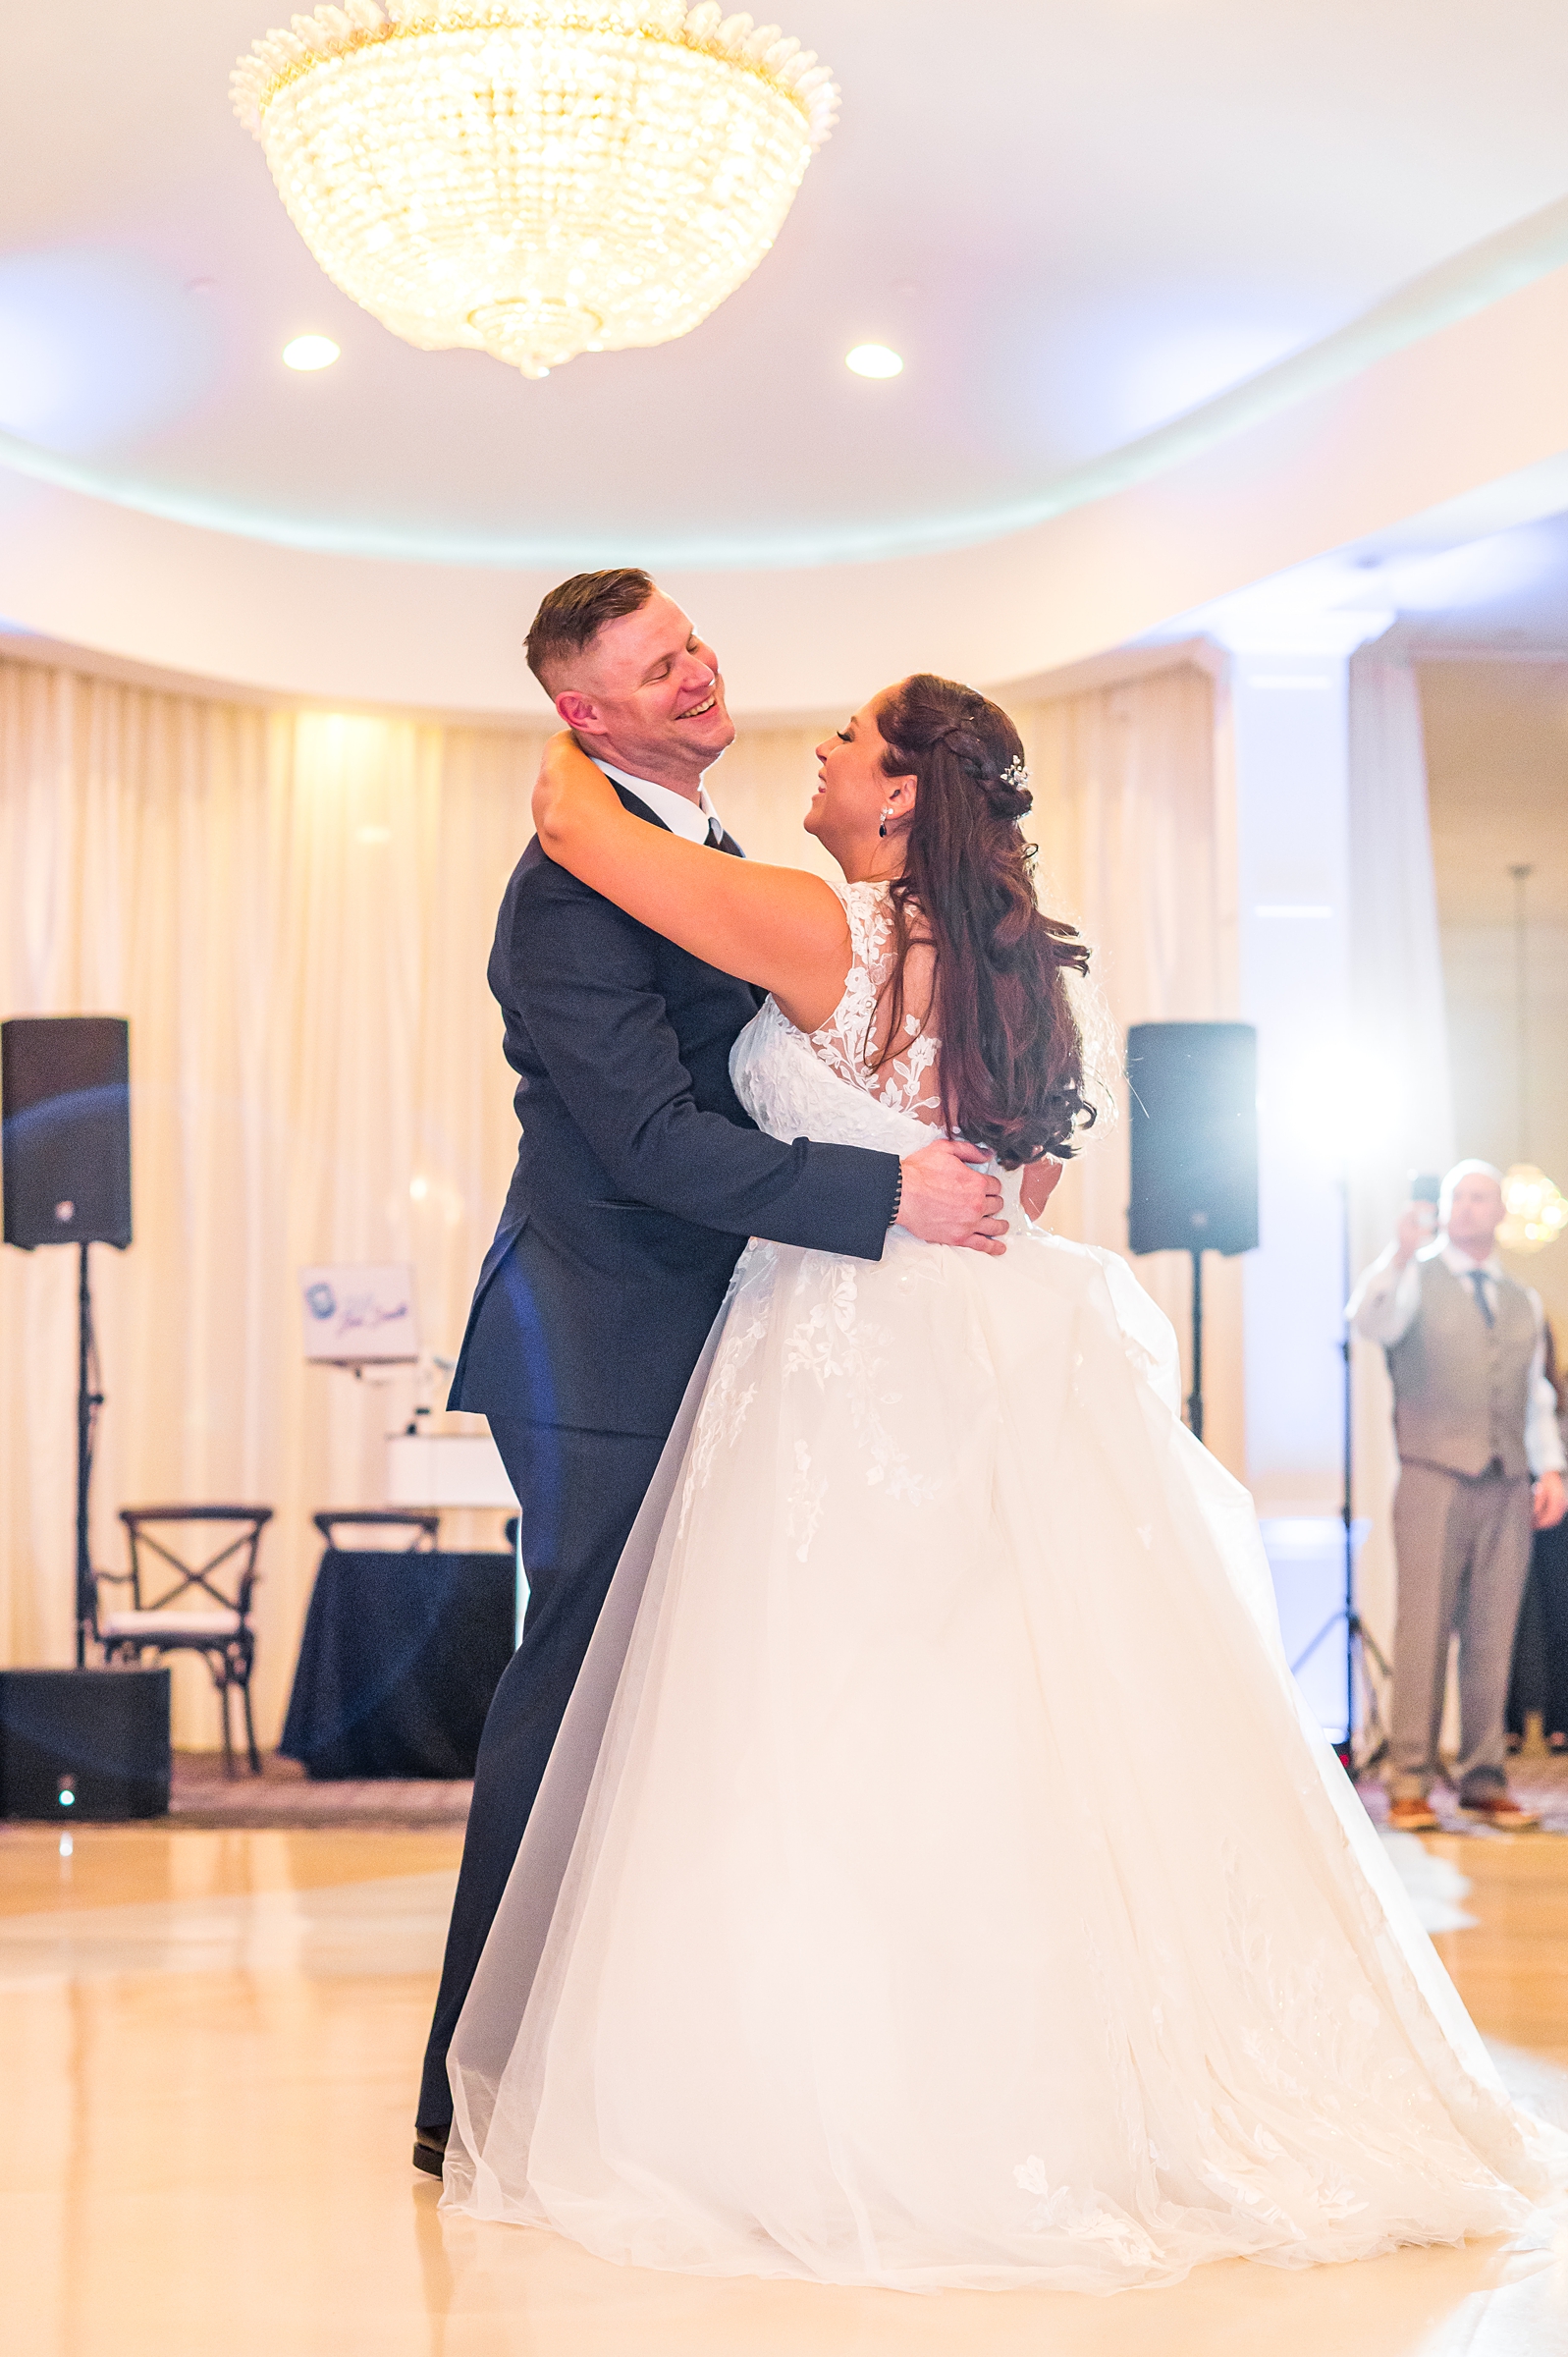 newlyweds share first dance together as husband and wife